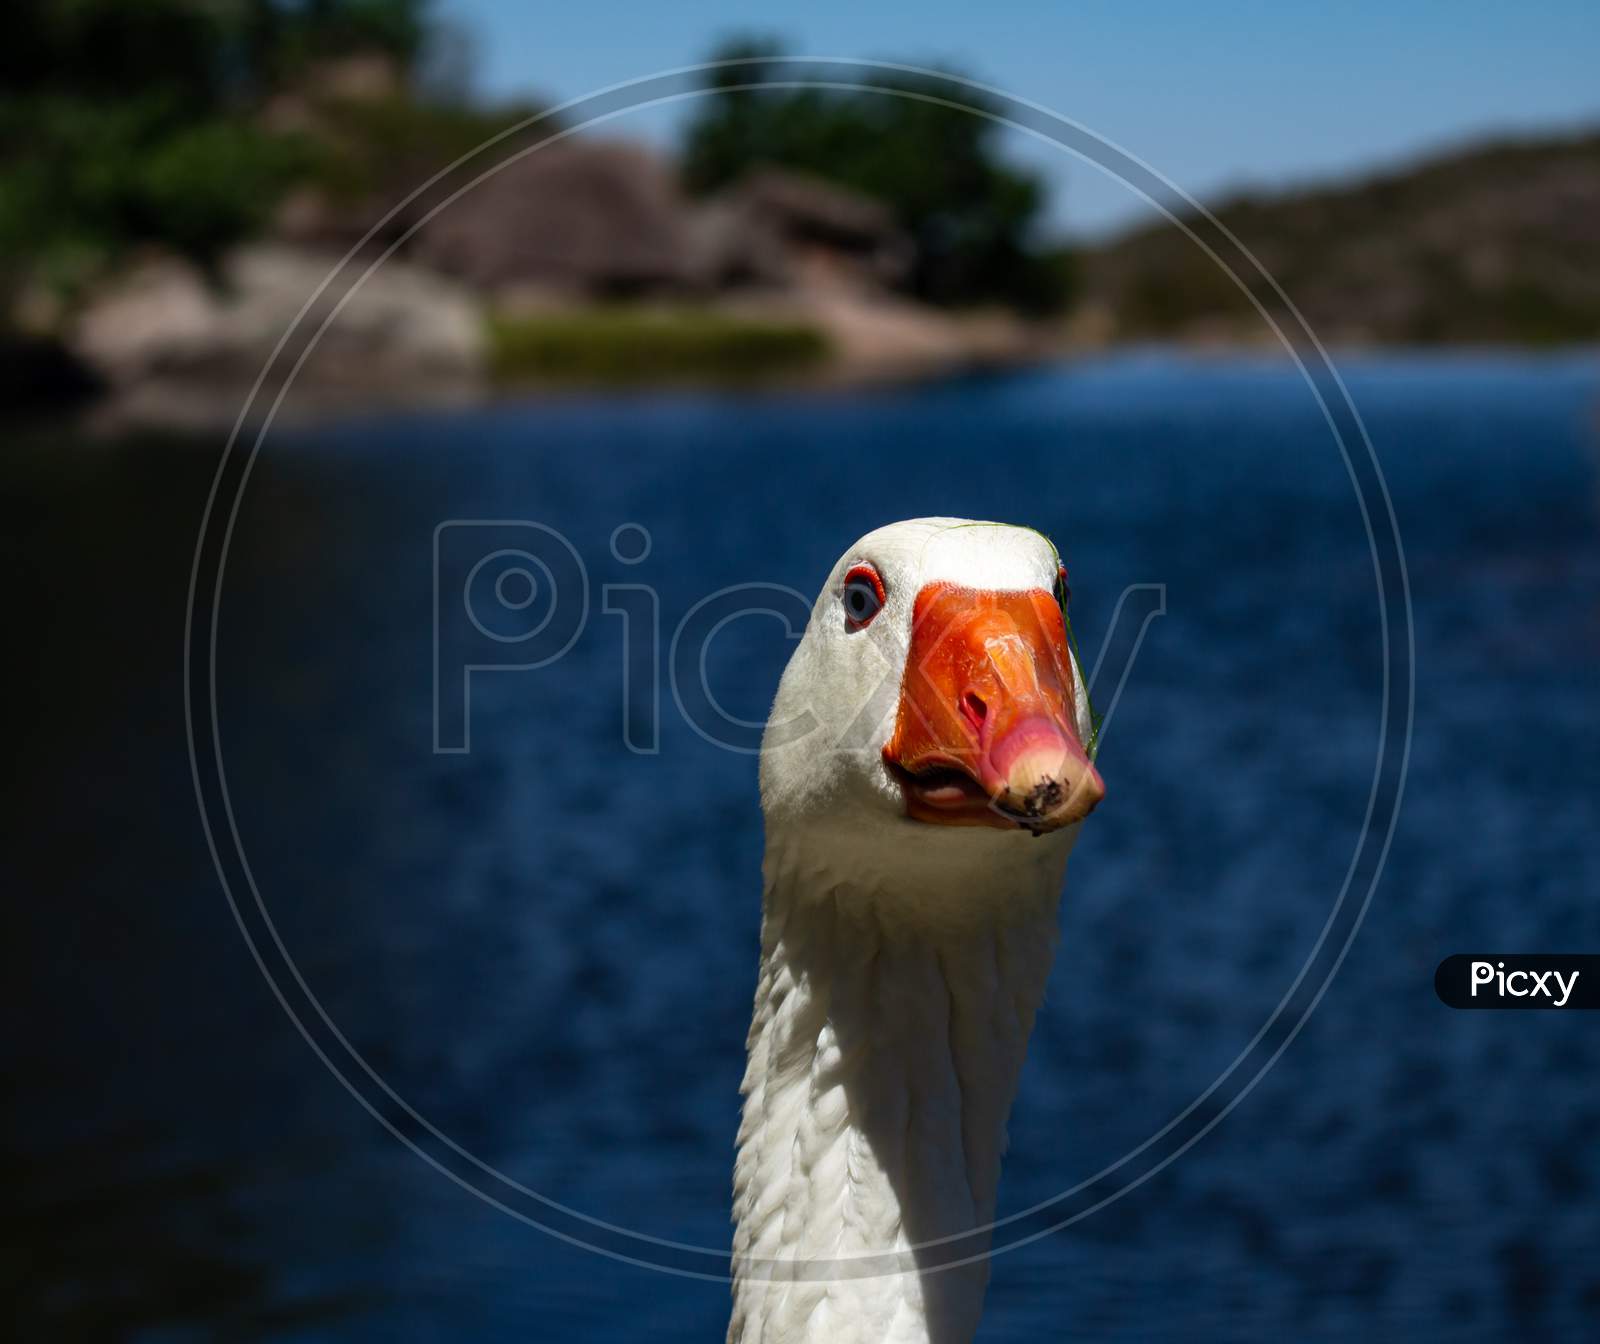 White Feathered Adult Goose In The Sun. Close-Up Of Cute Bird Looking At The Camera.